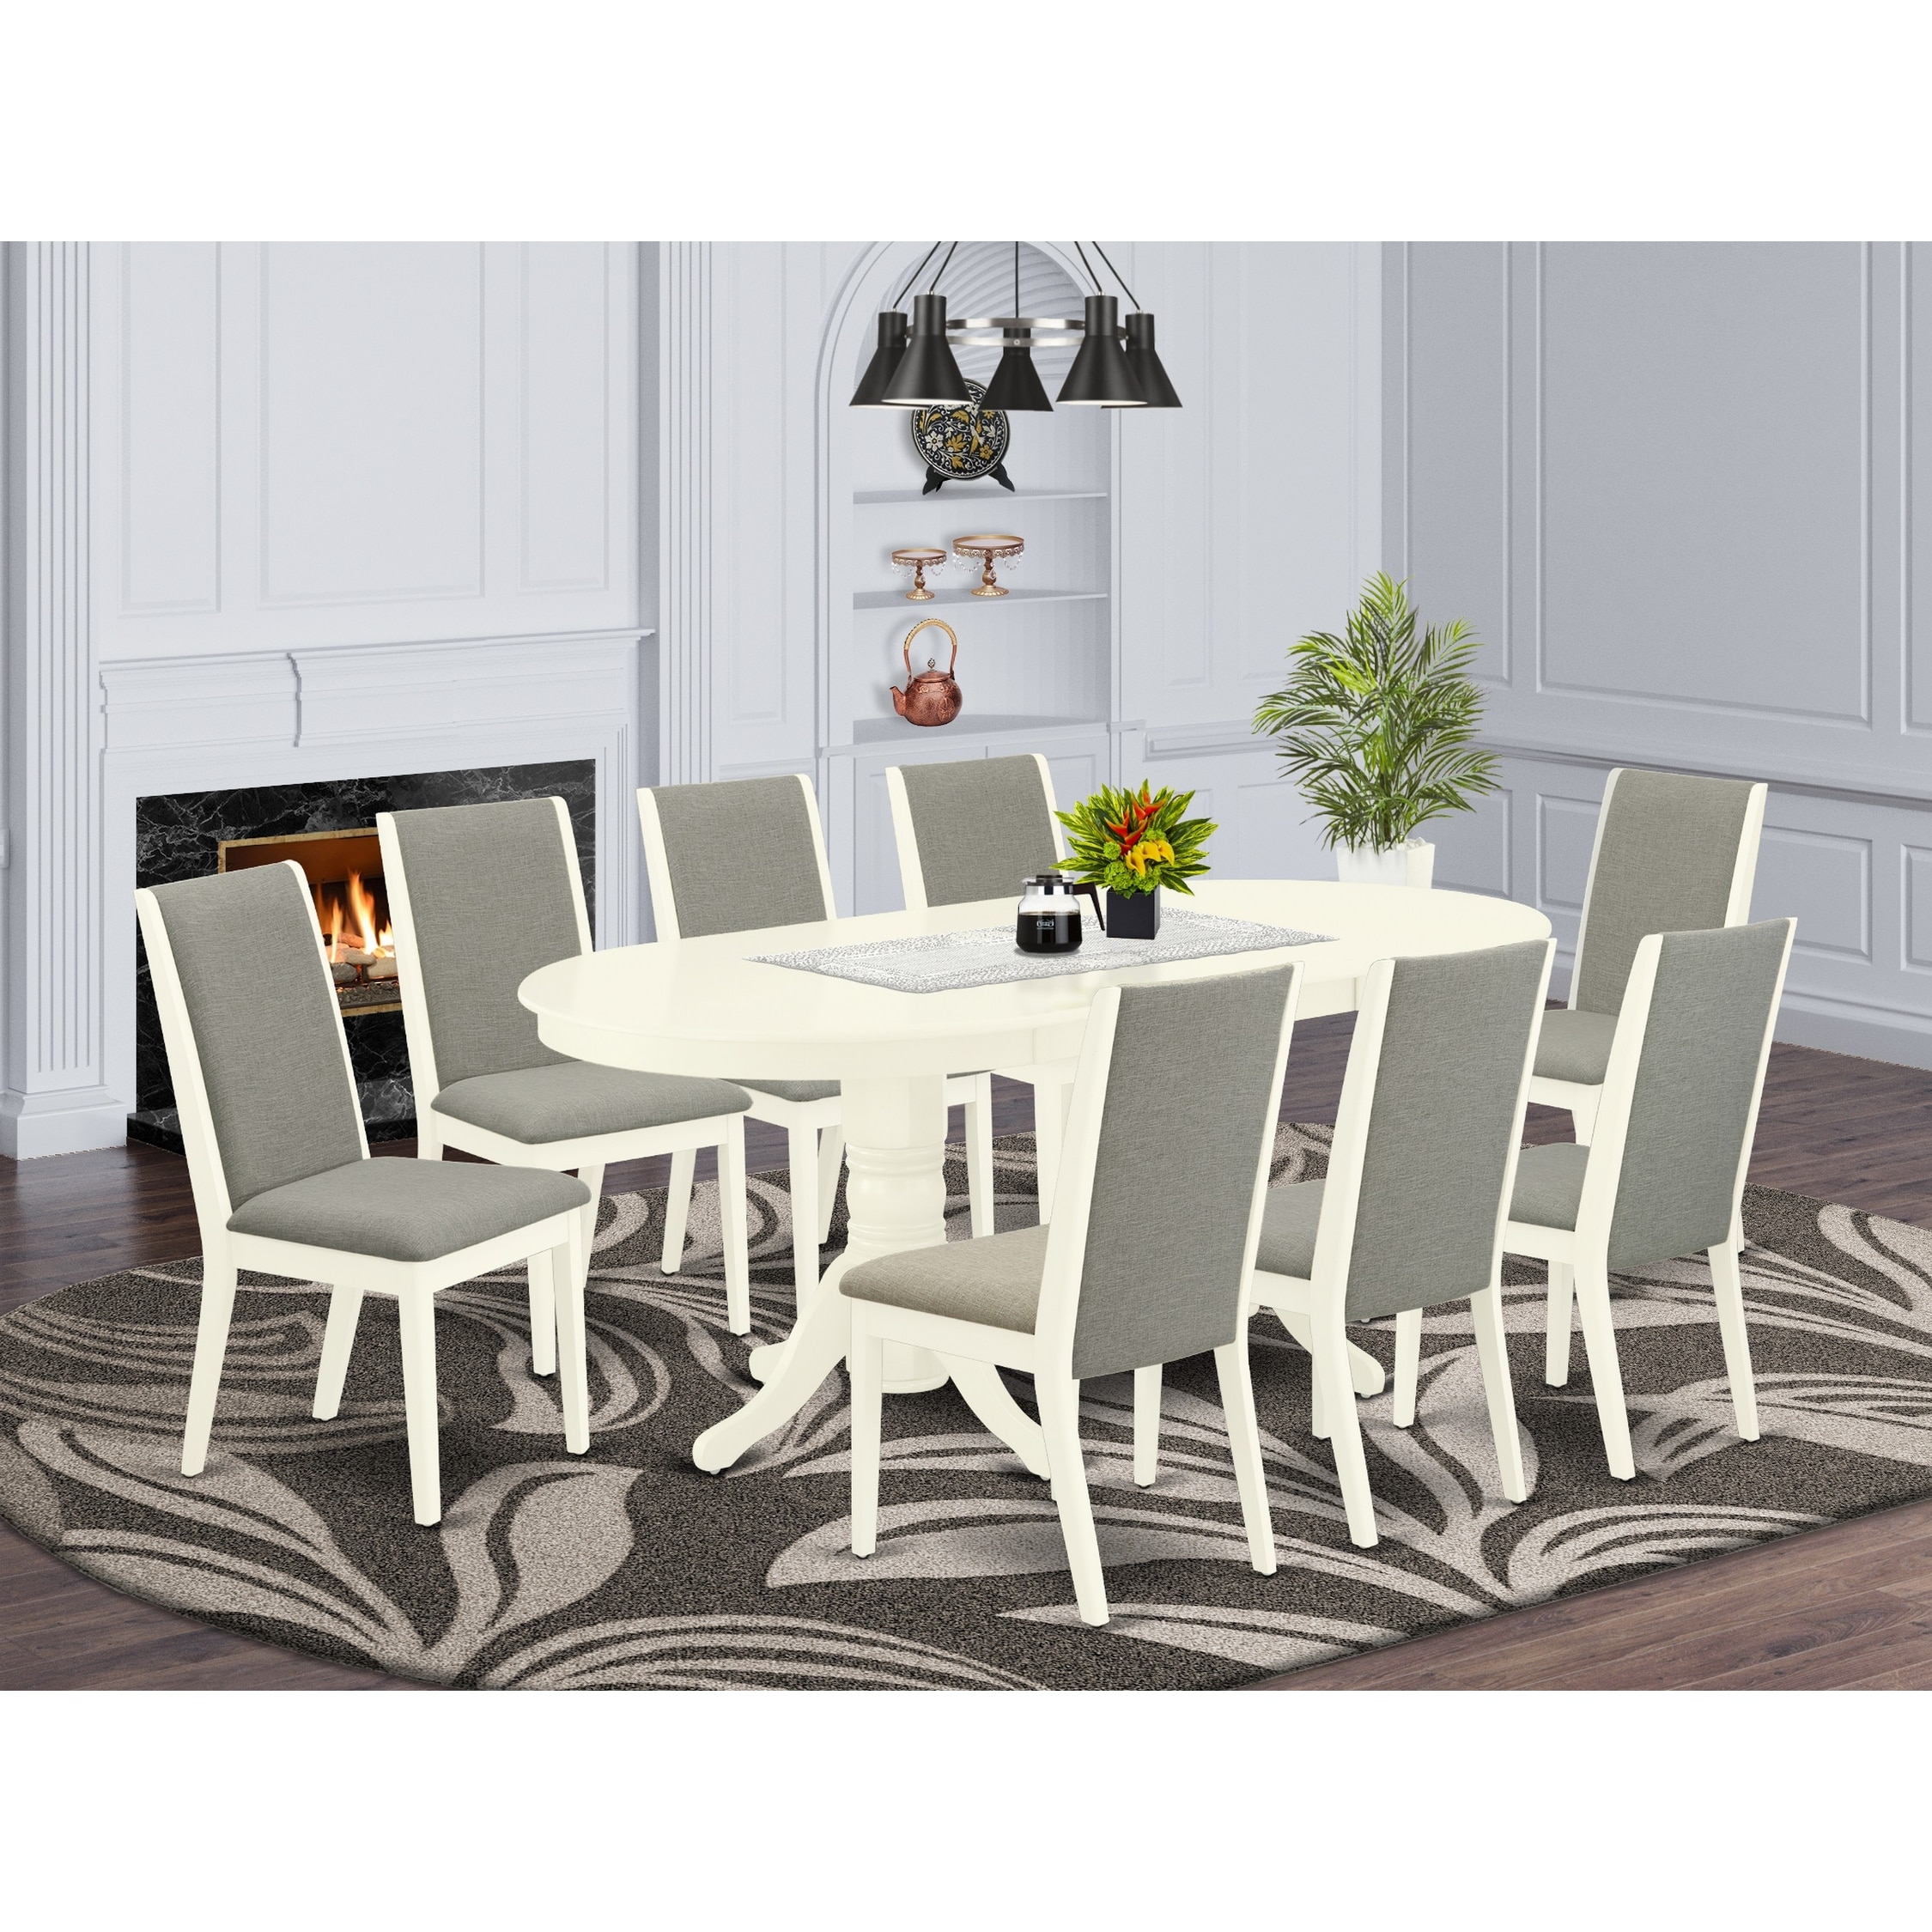 VALA9 LWH 06 9 Piece Kitchen Table Set 8 Person Dining Chairs And Butterfly Leaf Oval Kitchen Table Linen White Finish Overstock 32085577